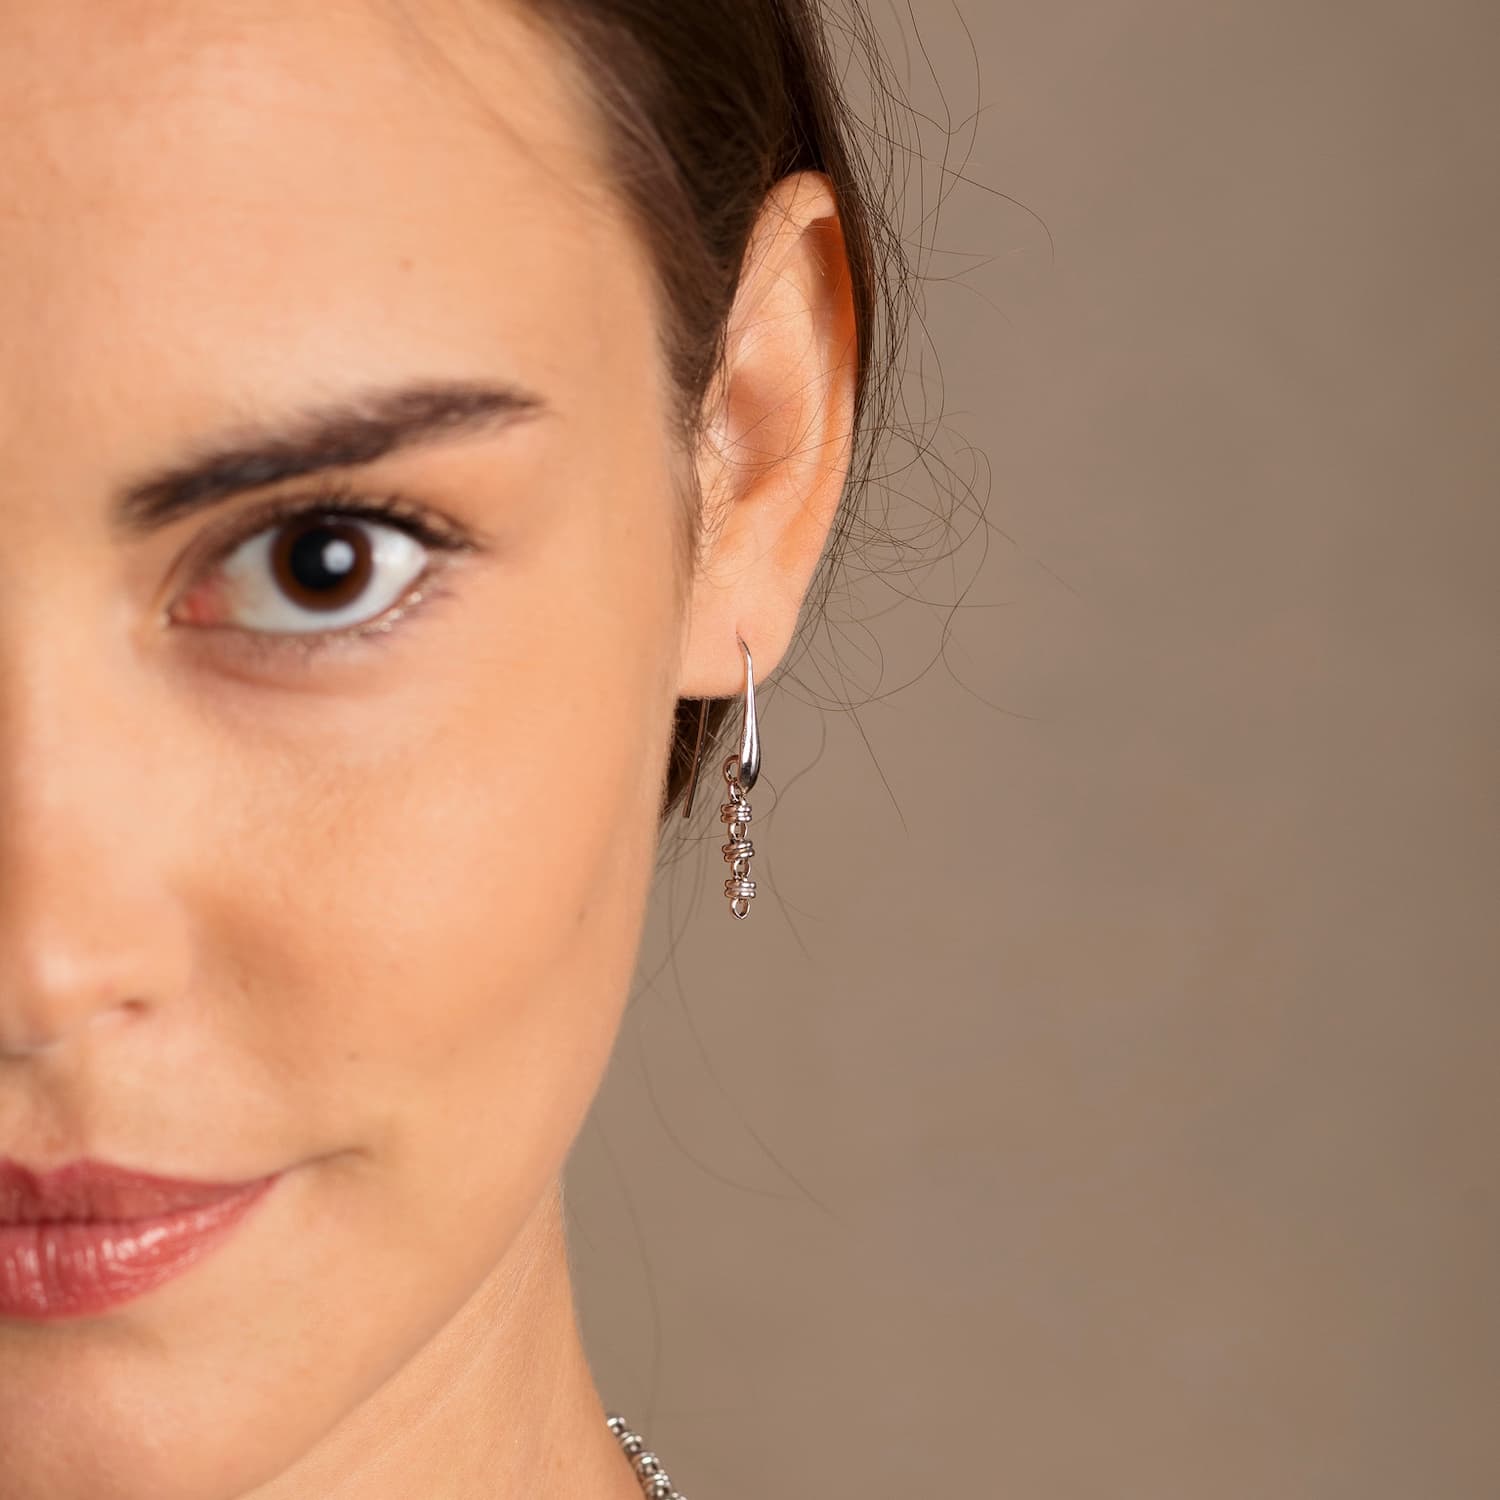 A closeup of a model wearing silver chain earrings designed and hand-crafted by DelBrenna Italian Jewelers in Tuscany. The earrings are designed based on the iconic Links collection of DelBrenna silver chains, necklaces, rings, and bracelets.